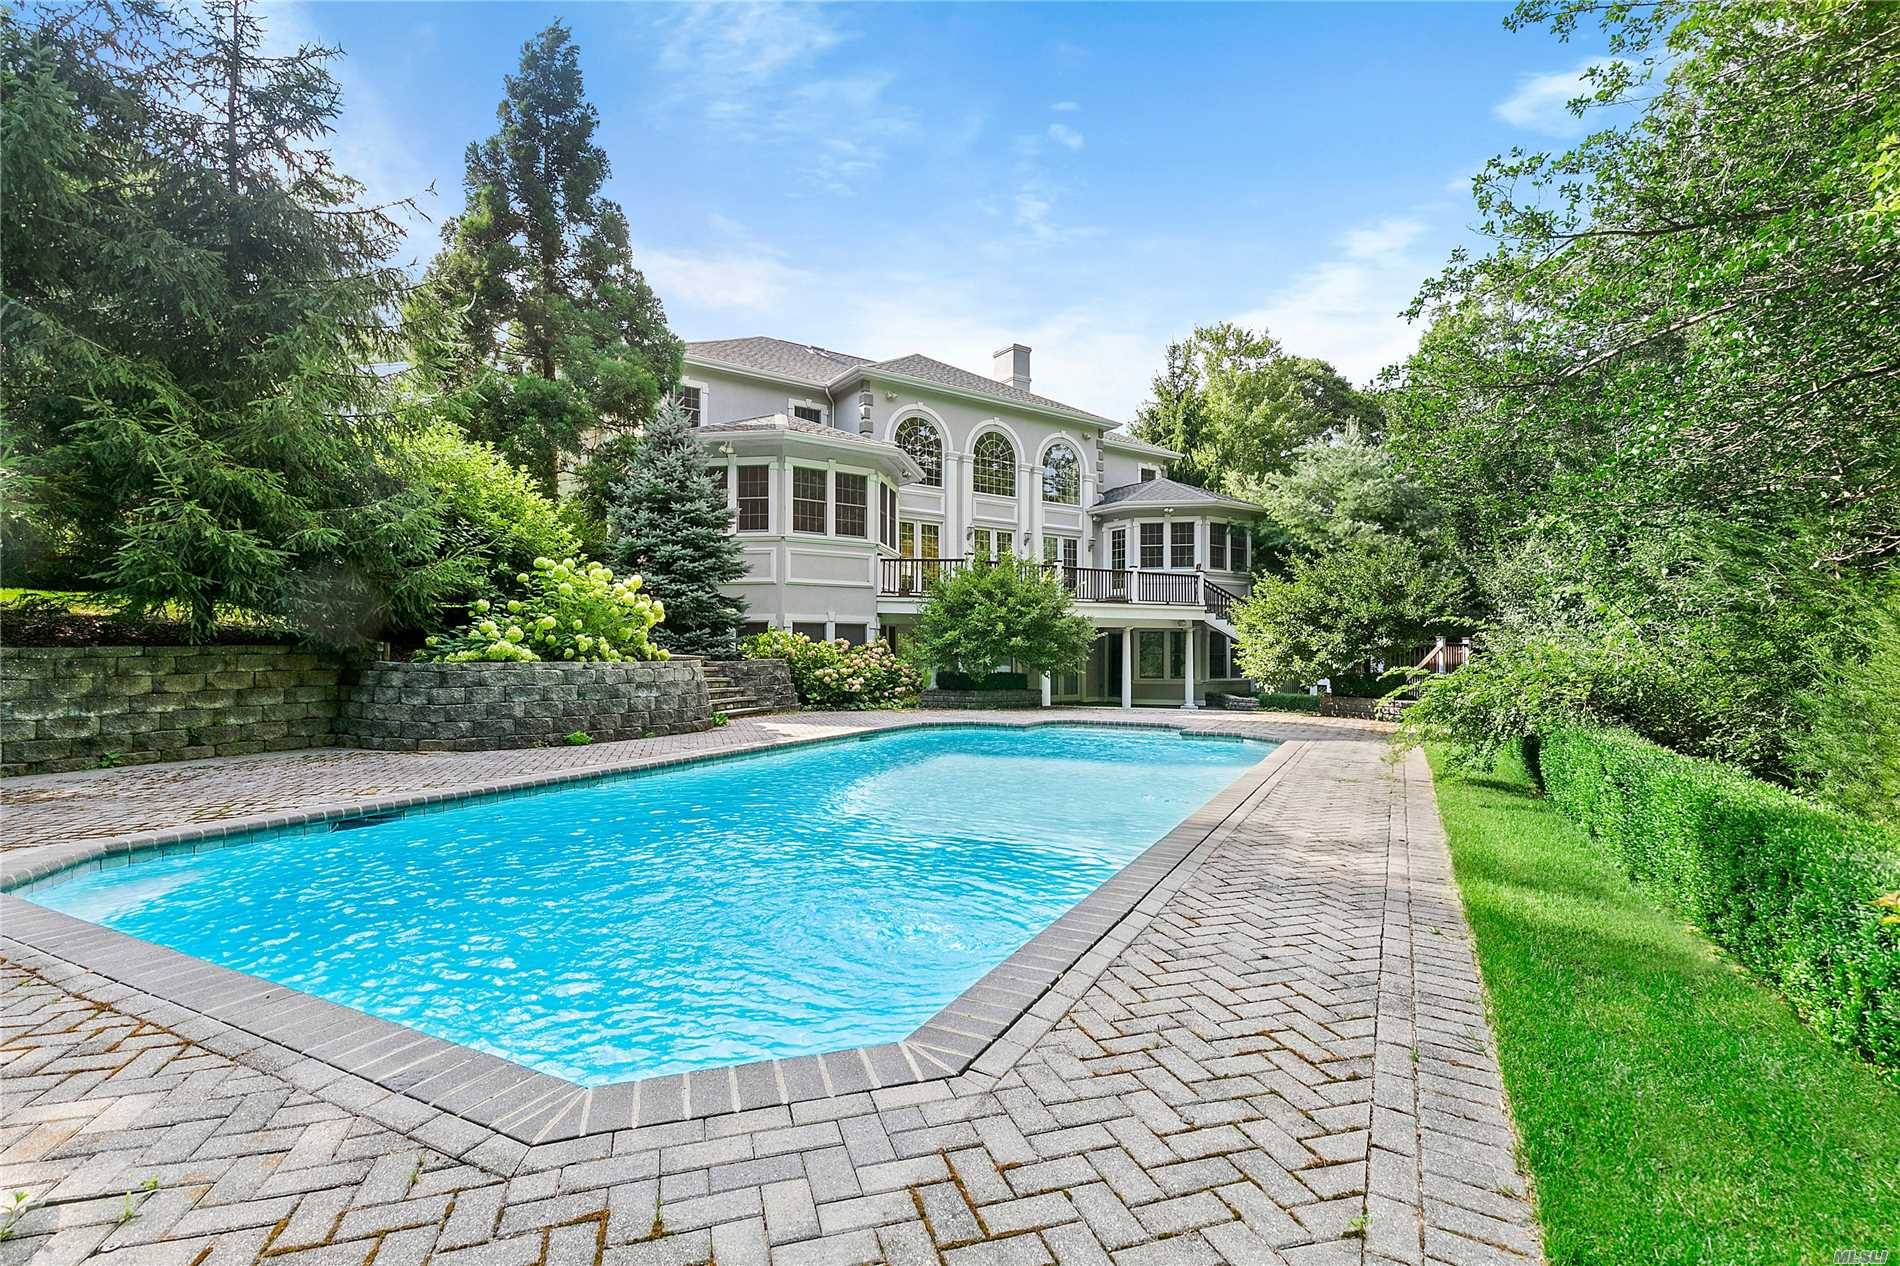 This Beautifully Maintained 5,800 +/- Square Foot Villa Is Located In Amagansett And Rests On Over 1.